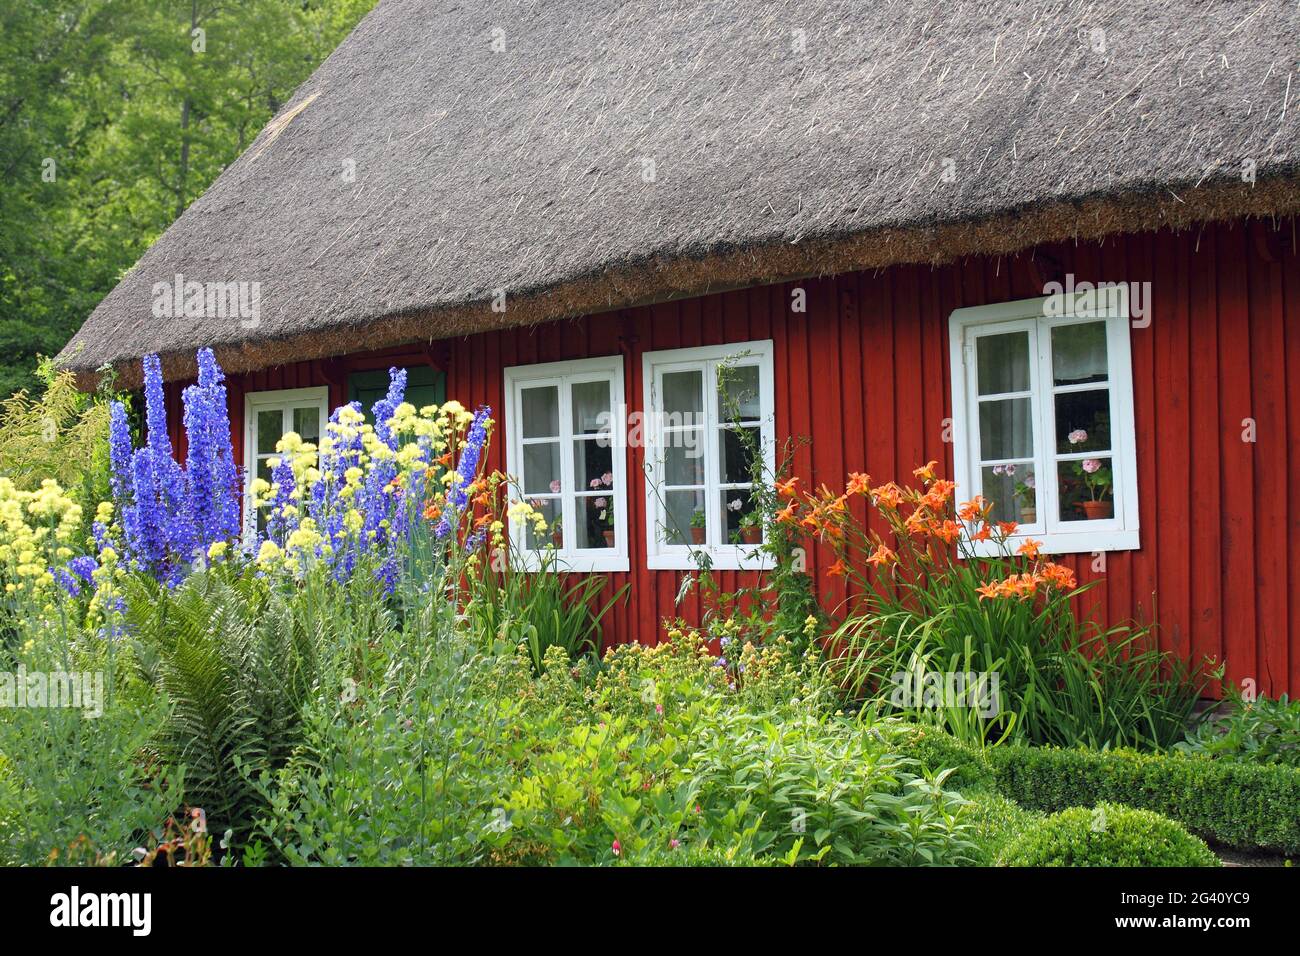 A pretty Swedish thatched red cottage and lush garden with flowers. Stock Photo